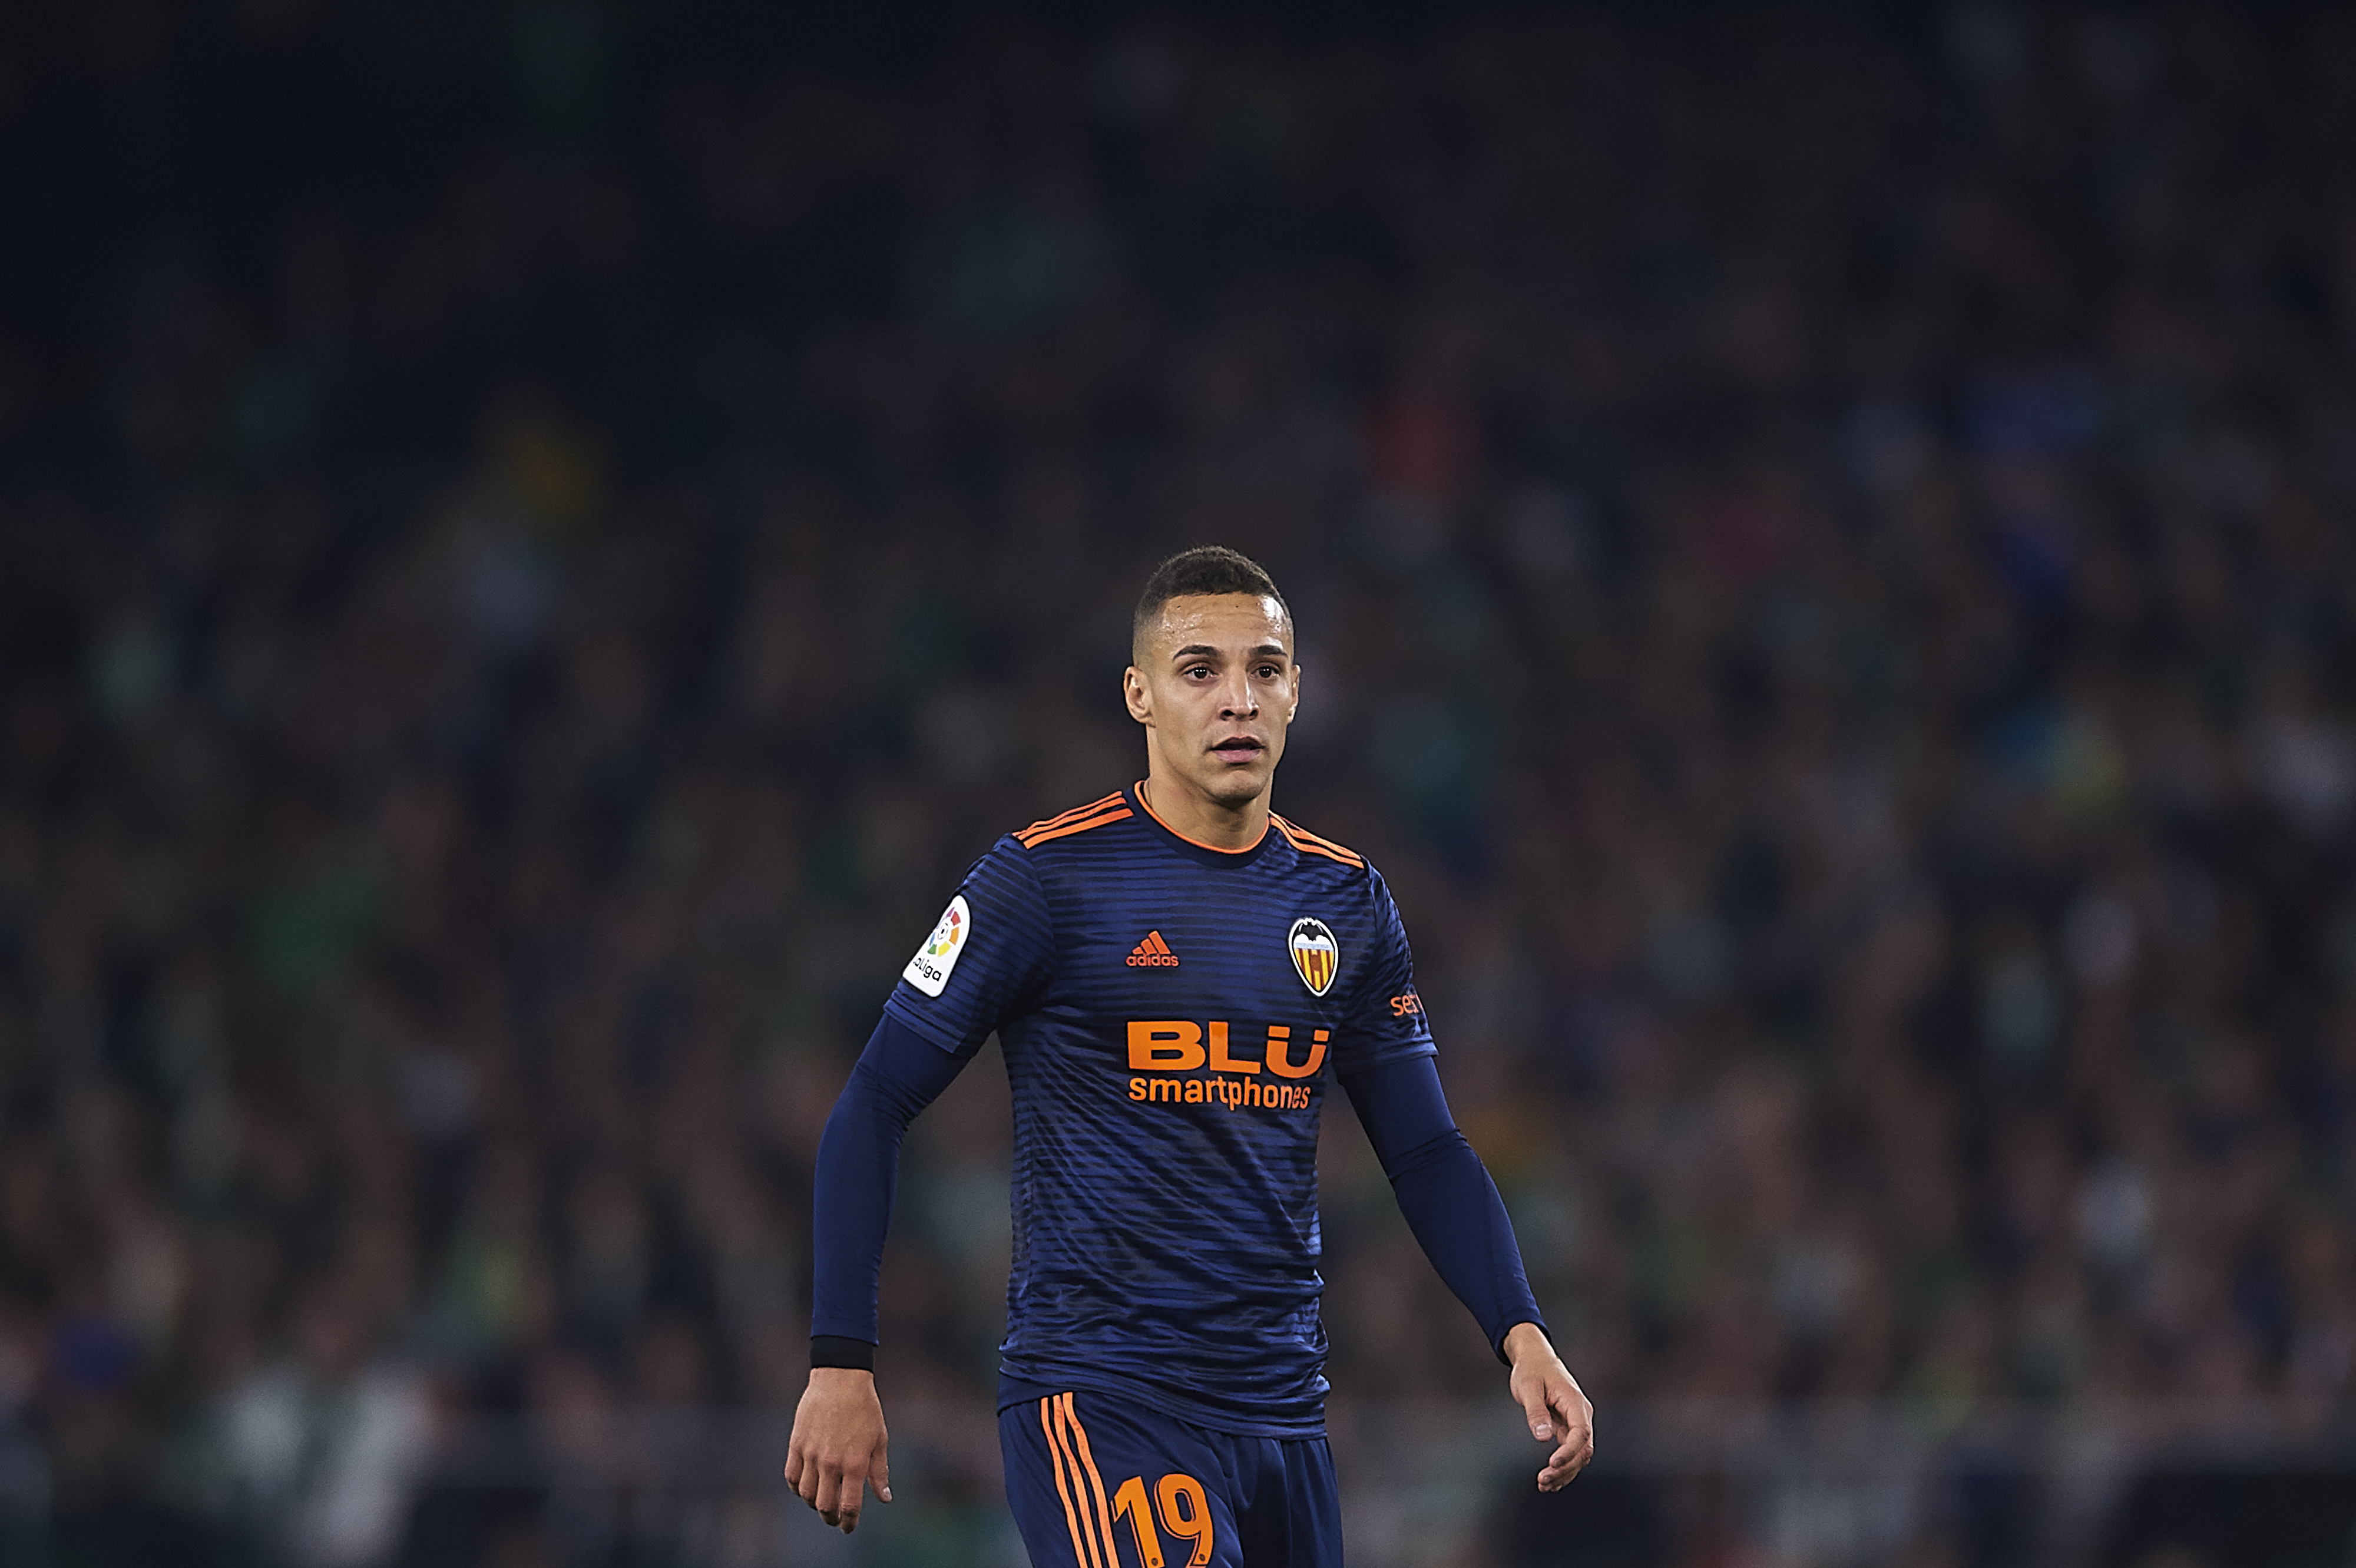 SEVILLE, SPAIN - FEBRUARY 07: Rodrigo Moreno of Valencia CF looks on during the Copa del Semi Final match between Real Betis and Valencia at Estadio Benito Villamarin on February 07, 2019 in Seville, Spain. (Photo by Aitor Alcalde/Getty Images)